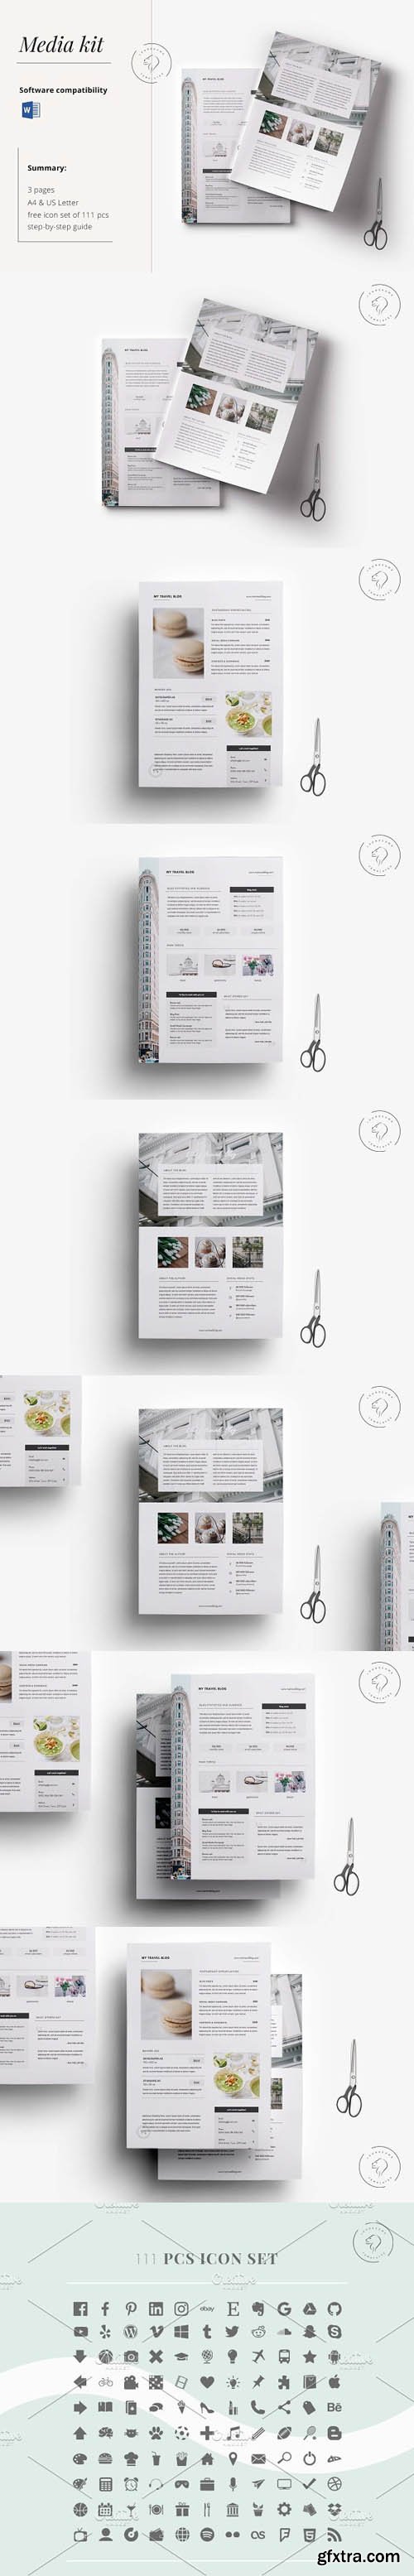 CM - Press Kit Template for Bloggers 1706174